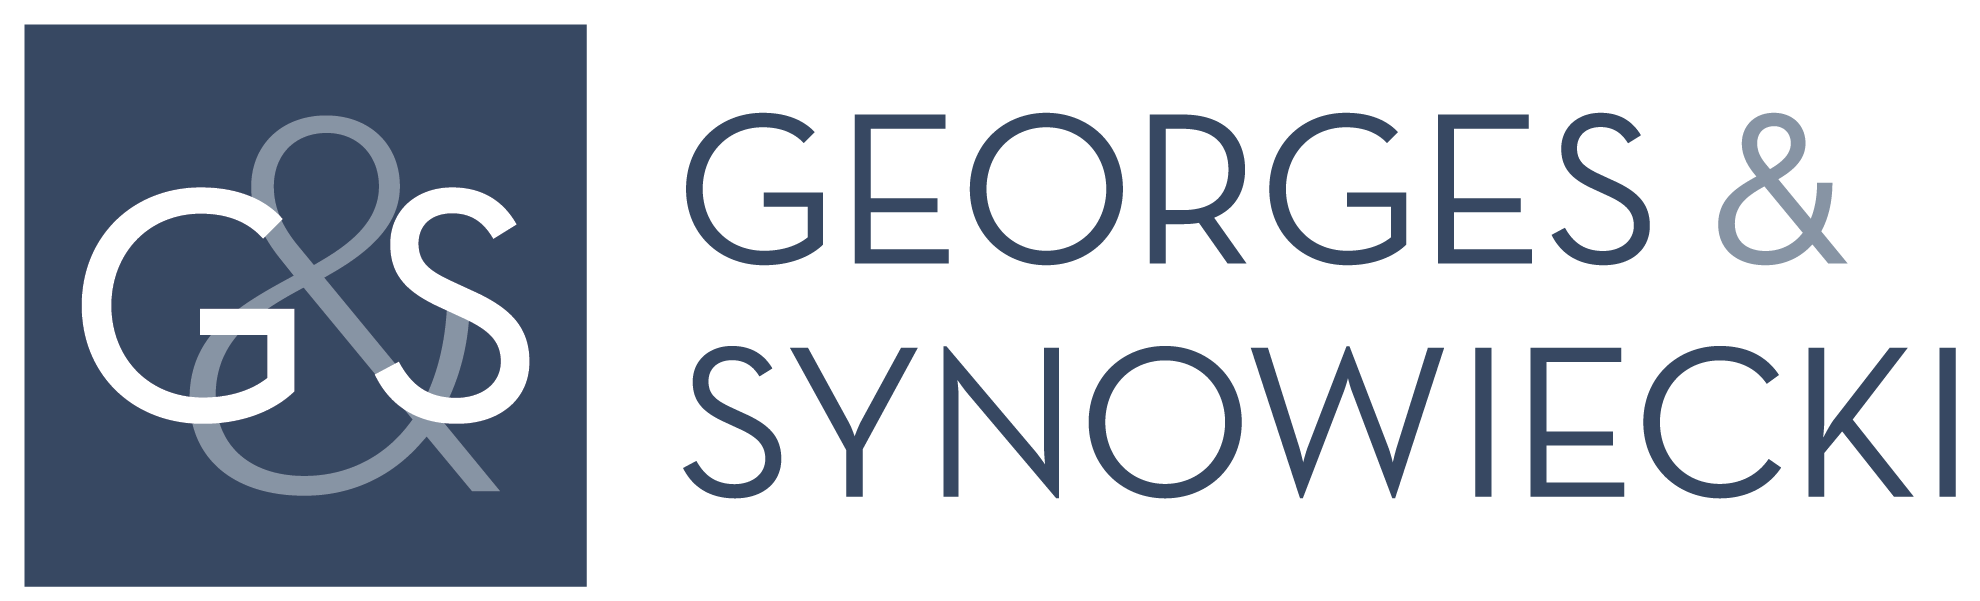 Georges & Synowiecki Logo_Small.png